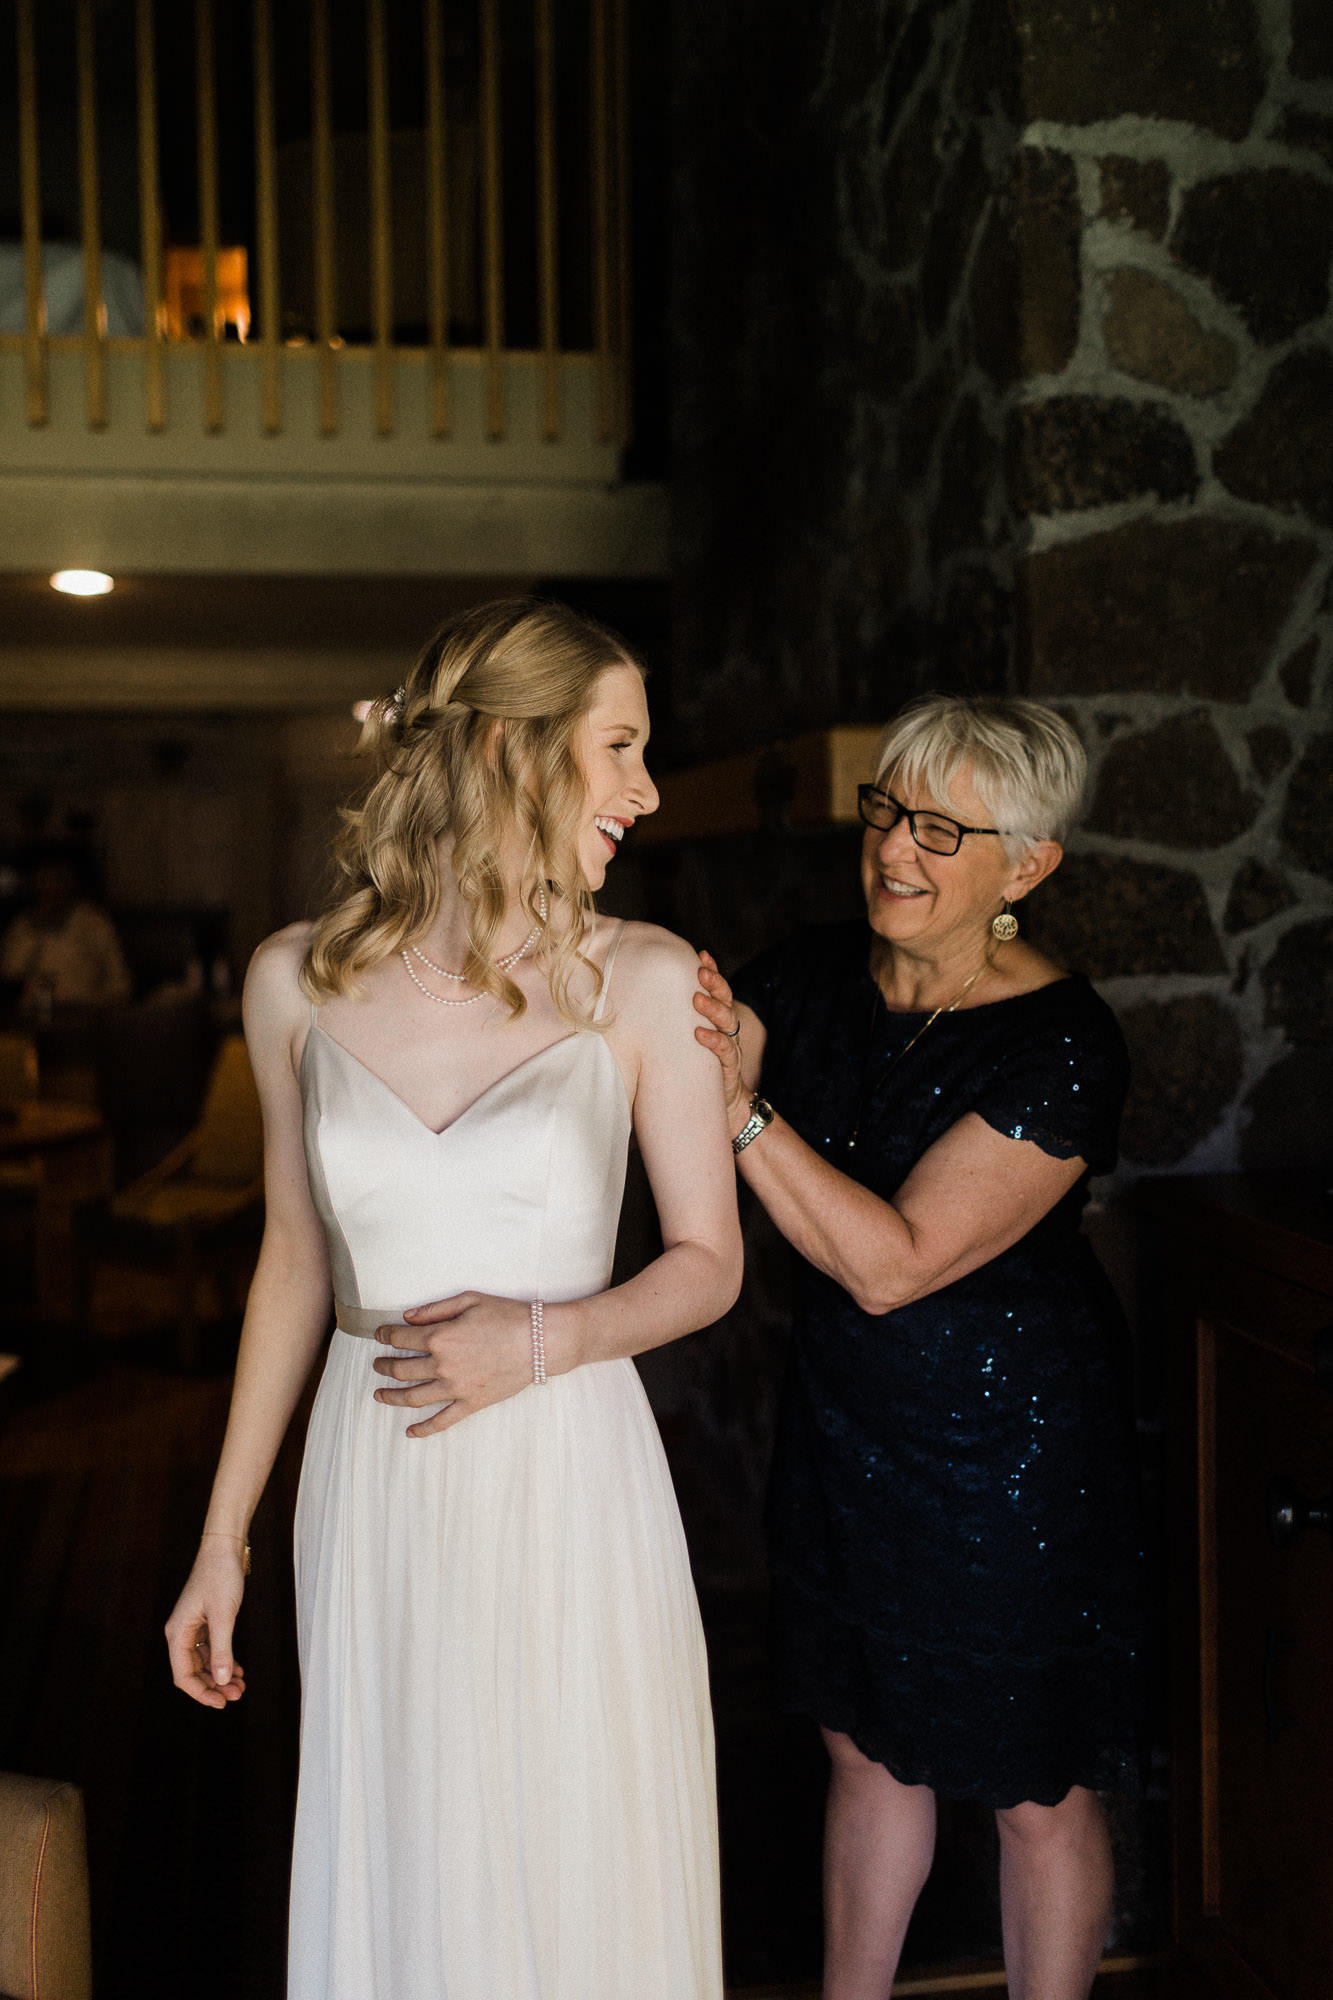 The mother of the bride helps the bride with her dress.